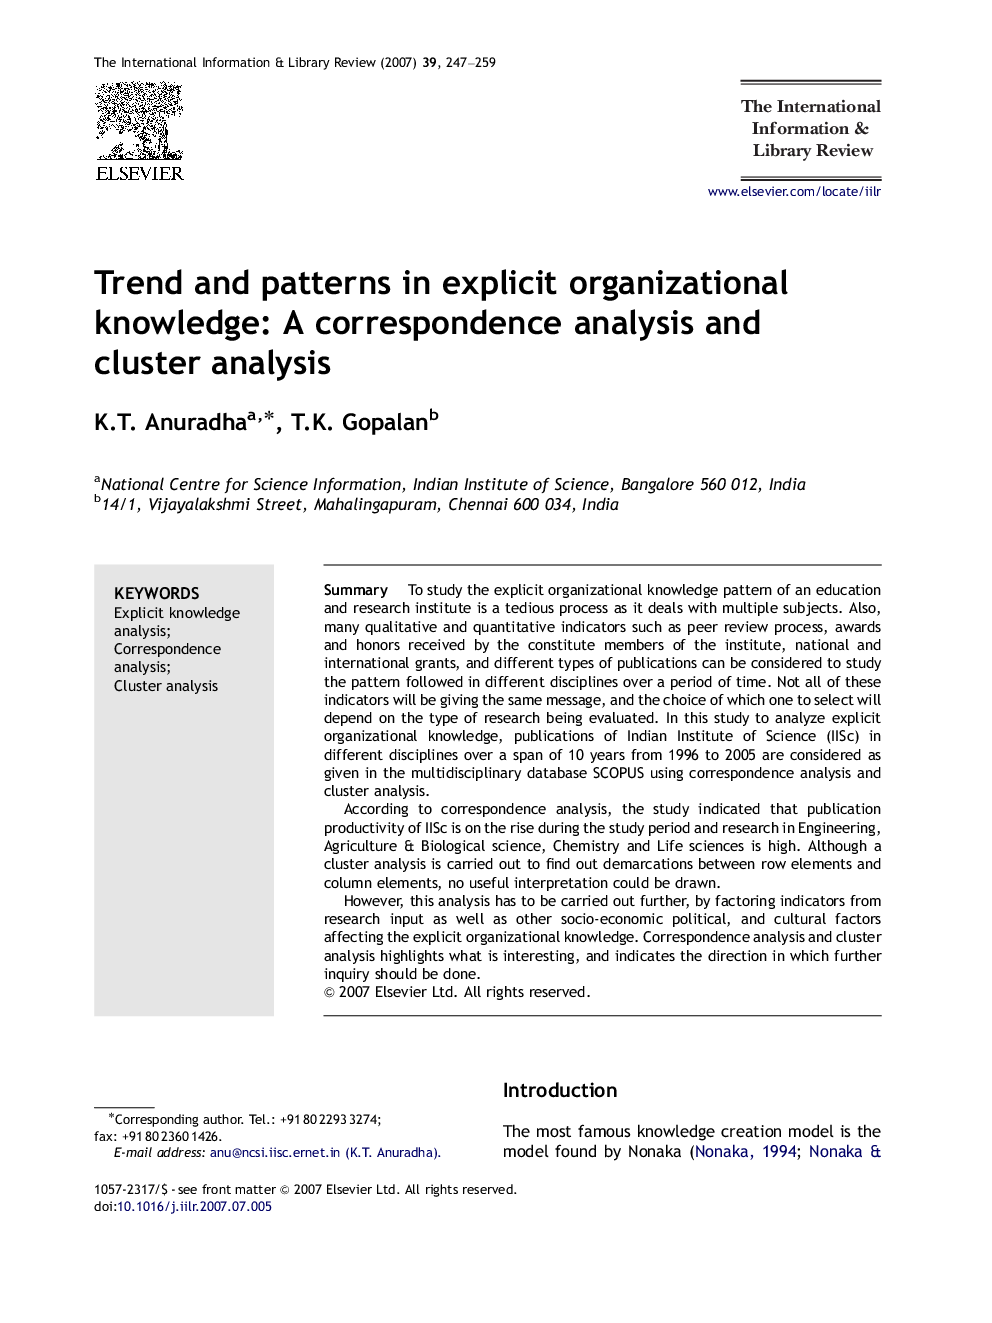 Trend and patterns in explicit organizational knowledge: A correspondence analysis and cluster analysis